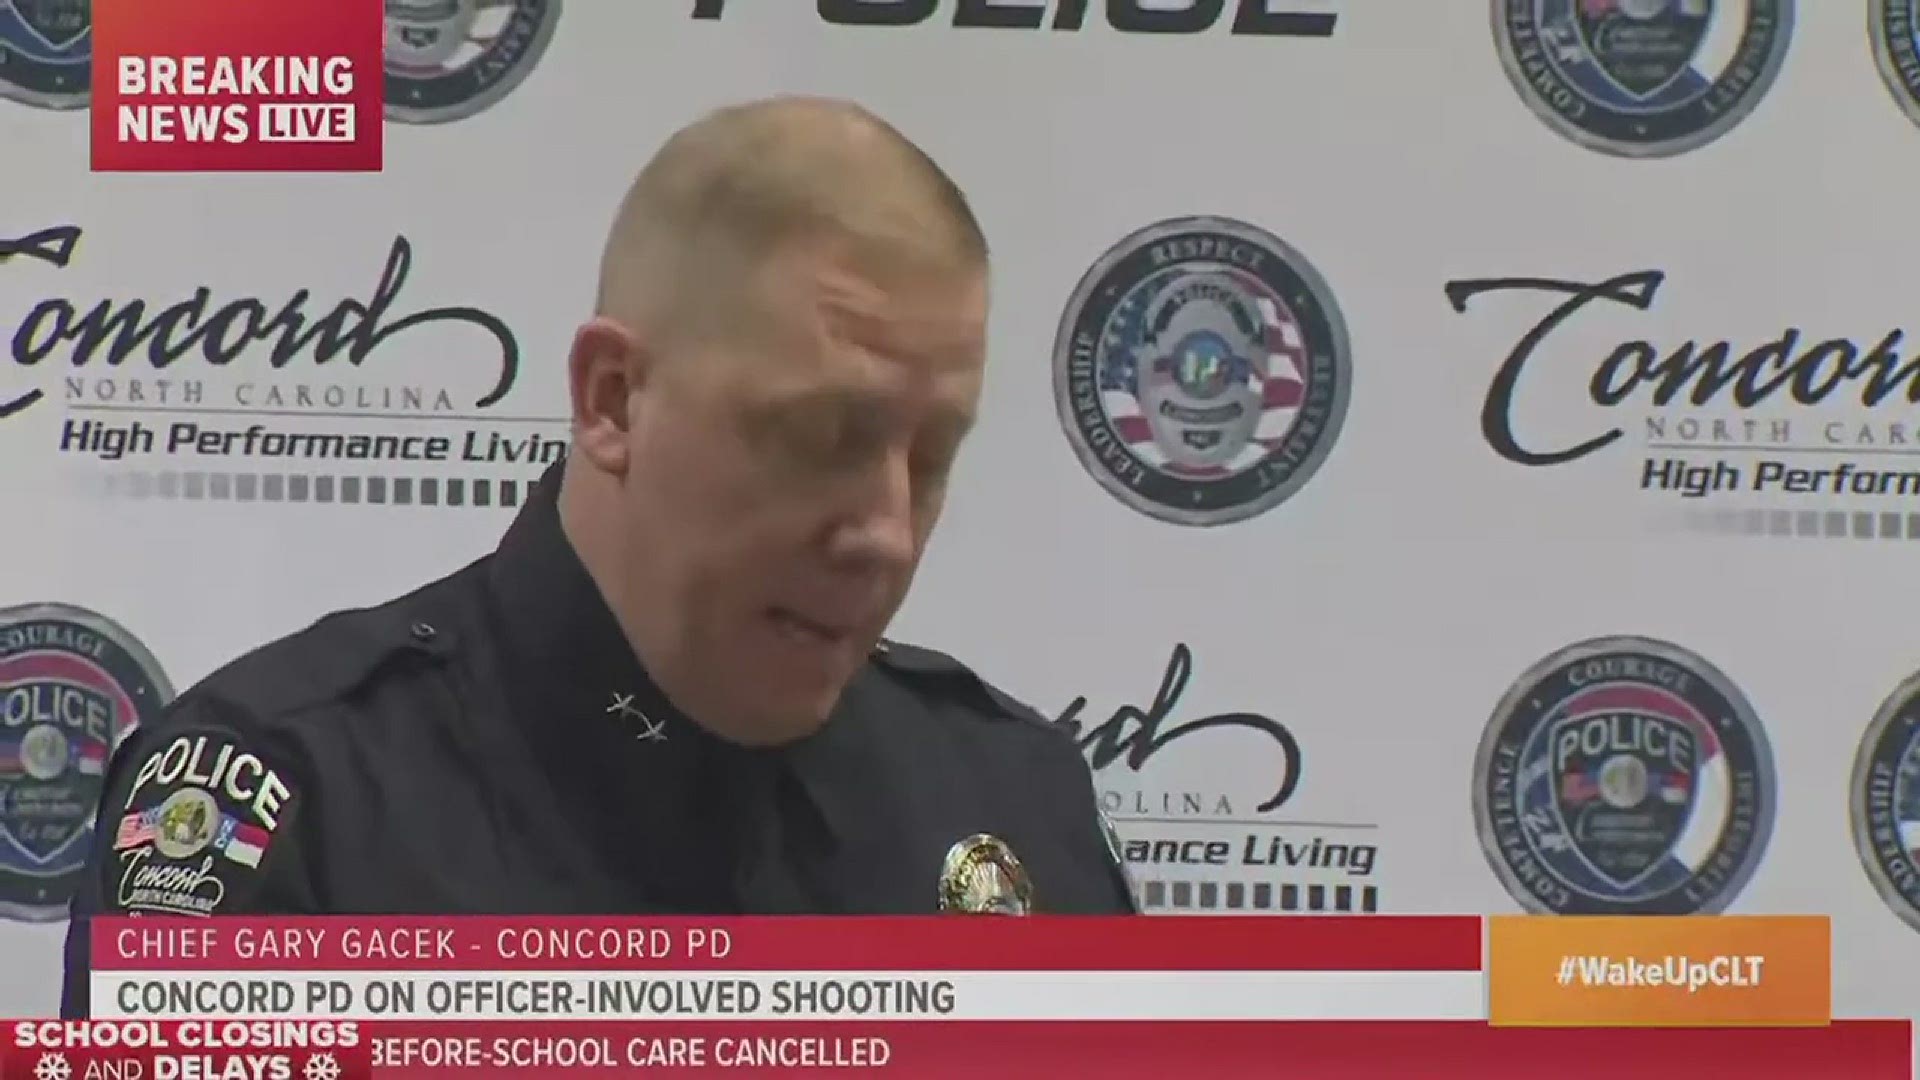 Concord Police Chief Gary Gacek provided an update on the investigation of the deadly shooting of a 25-year-old officer and suspect Wednesday night.